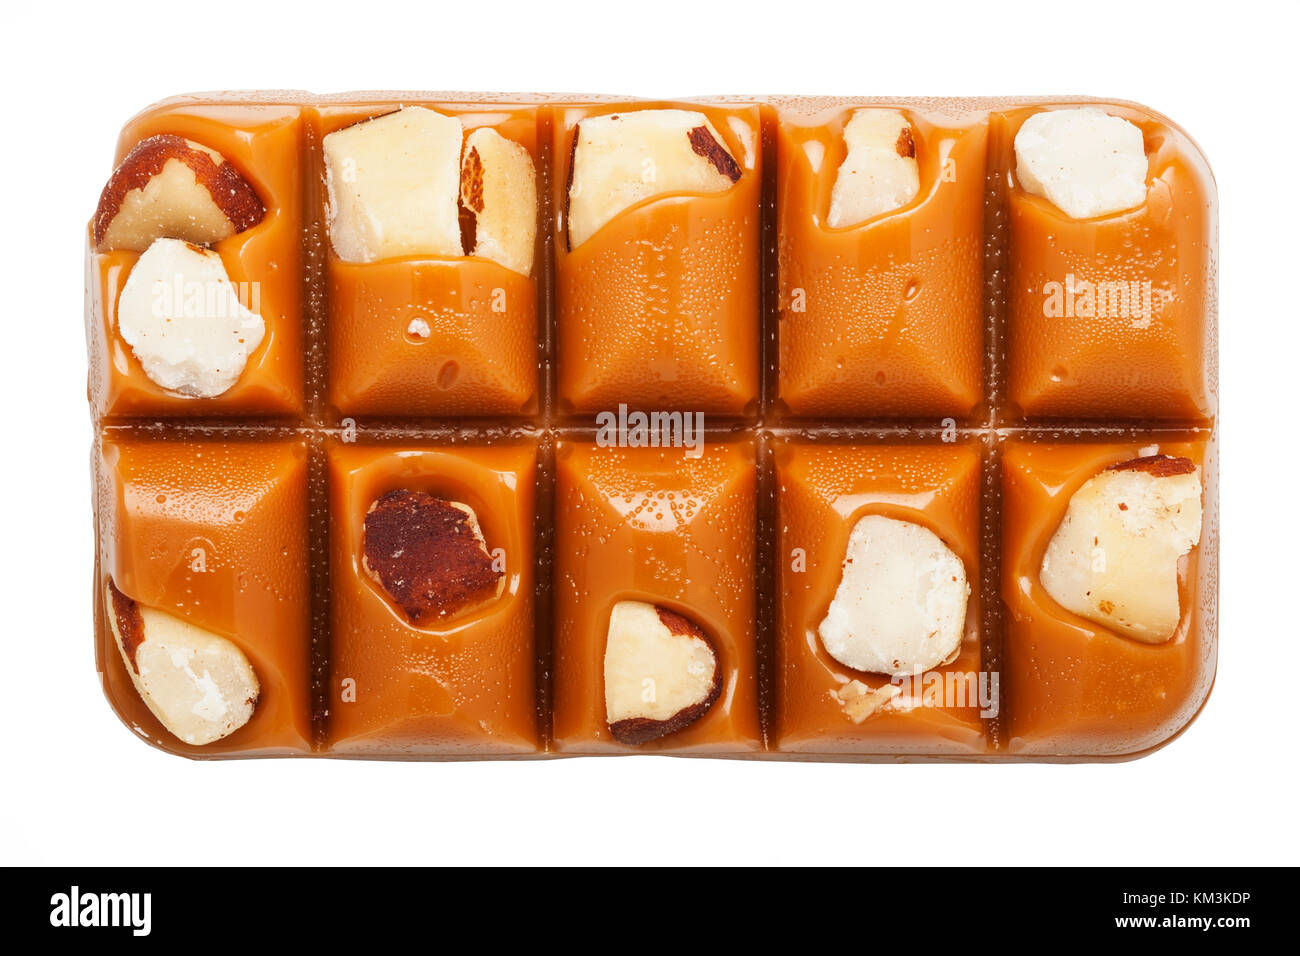 A slab of Walker's Brazil Nut Toffee on a white background Stock Photo